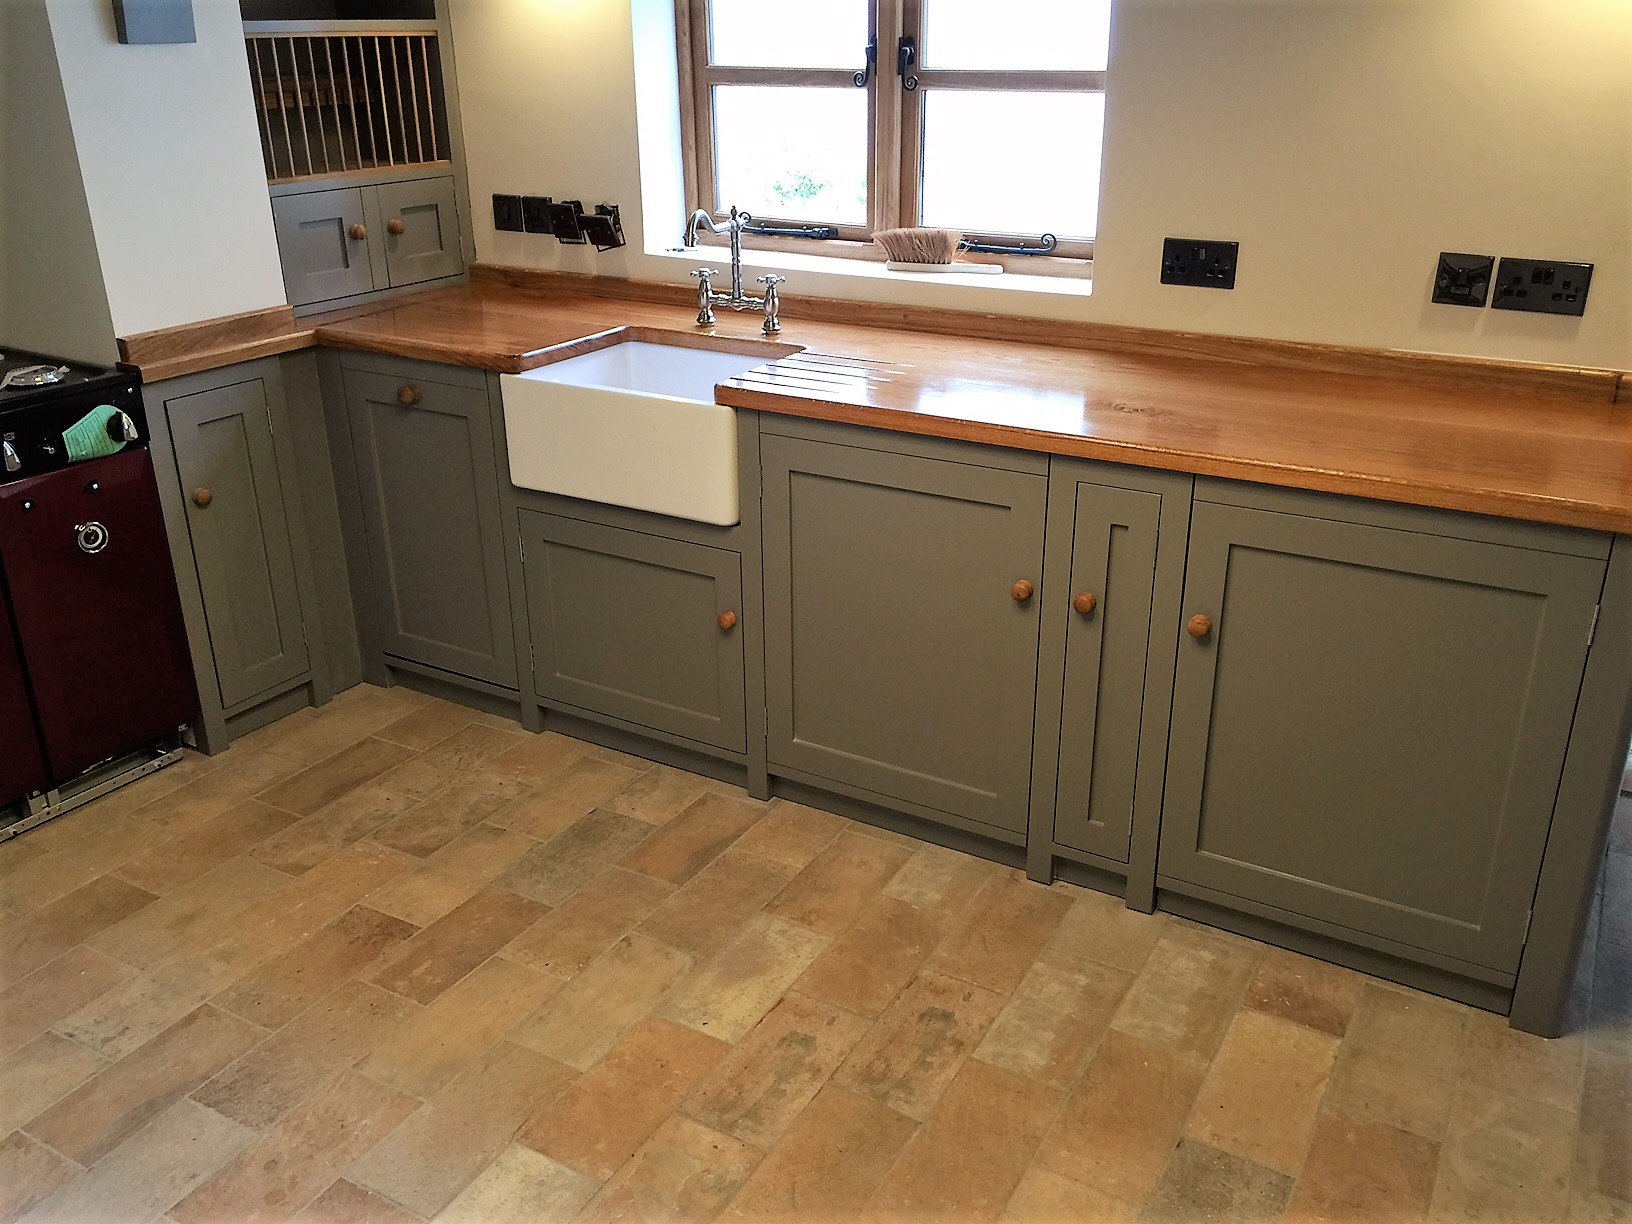 Fully bespoke fitted kitchen made from solid wood in shaker stlyle,solid oak work top.